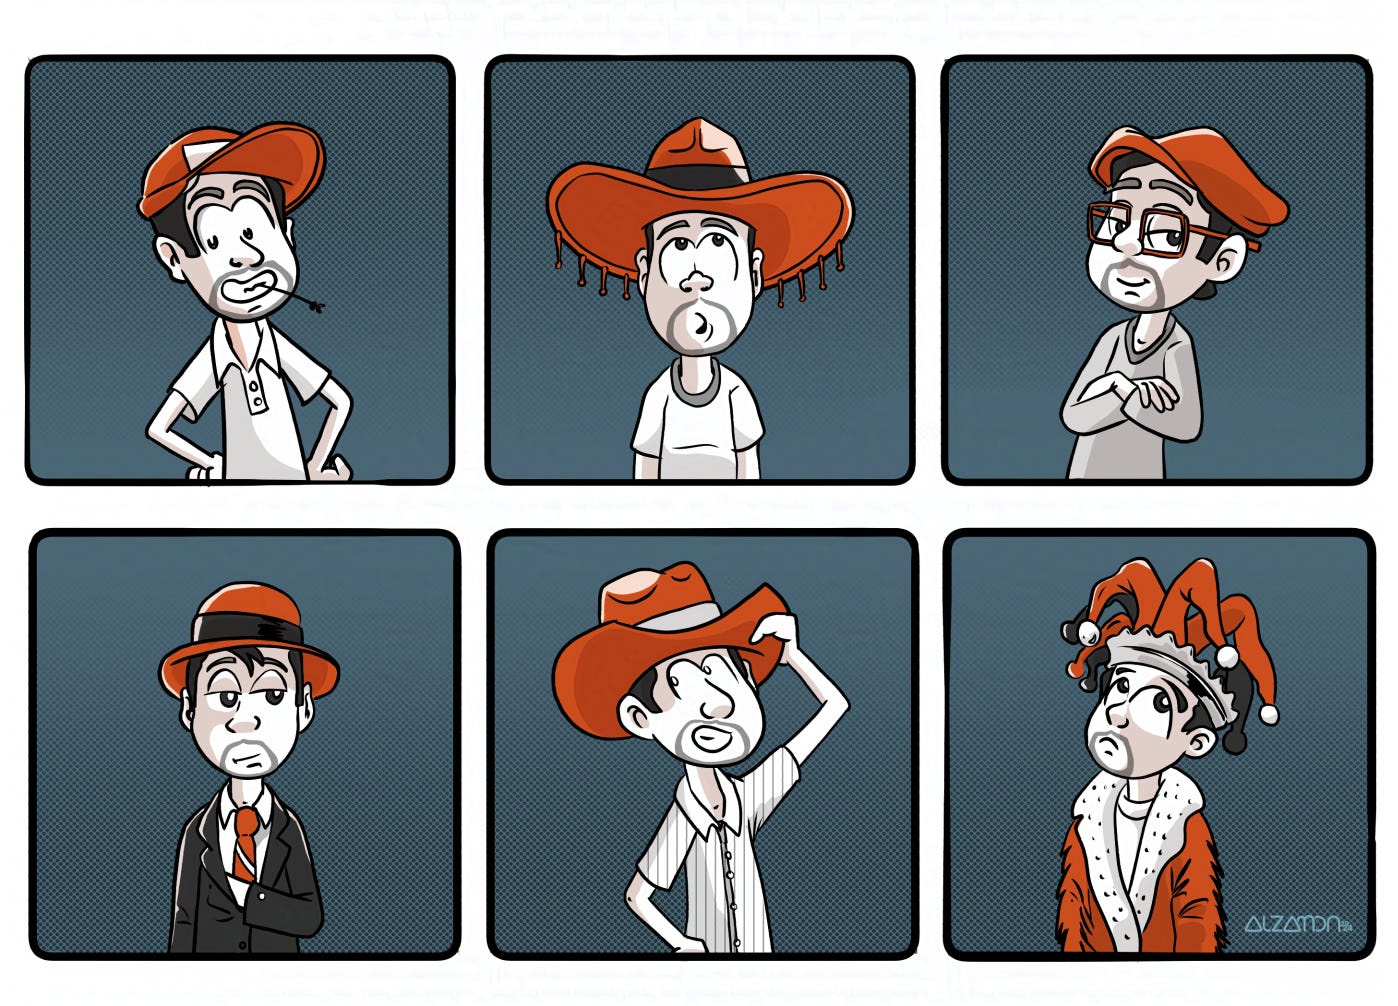 Header image of the author as cartoon mascot character wearing a variety of hats.